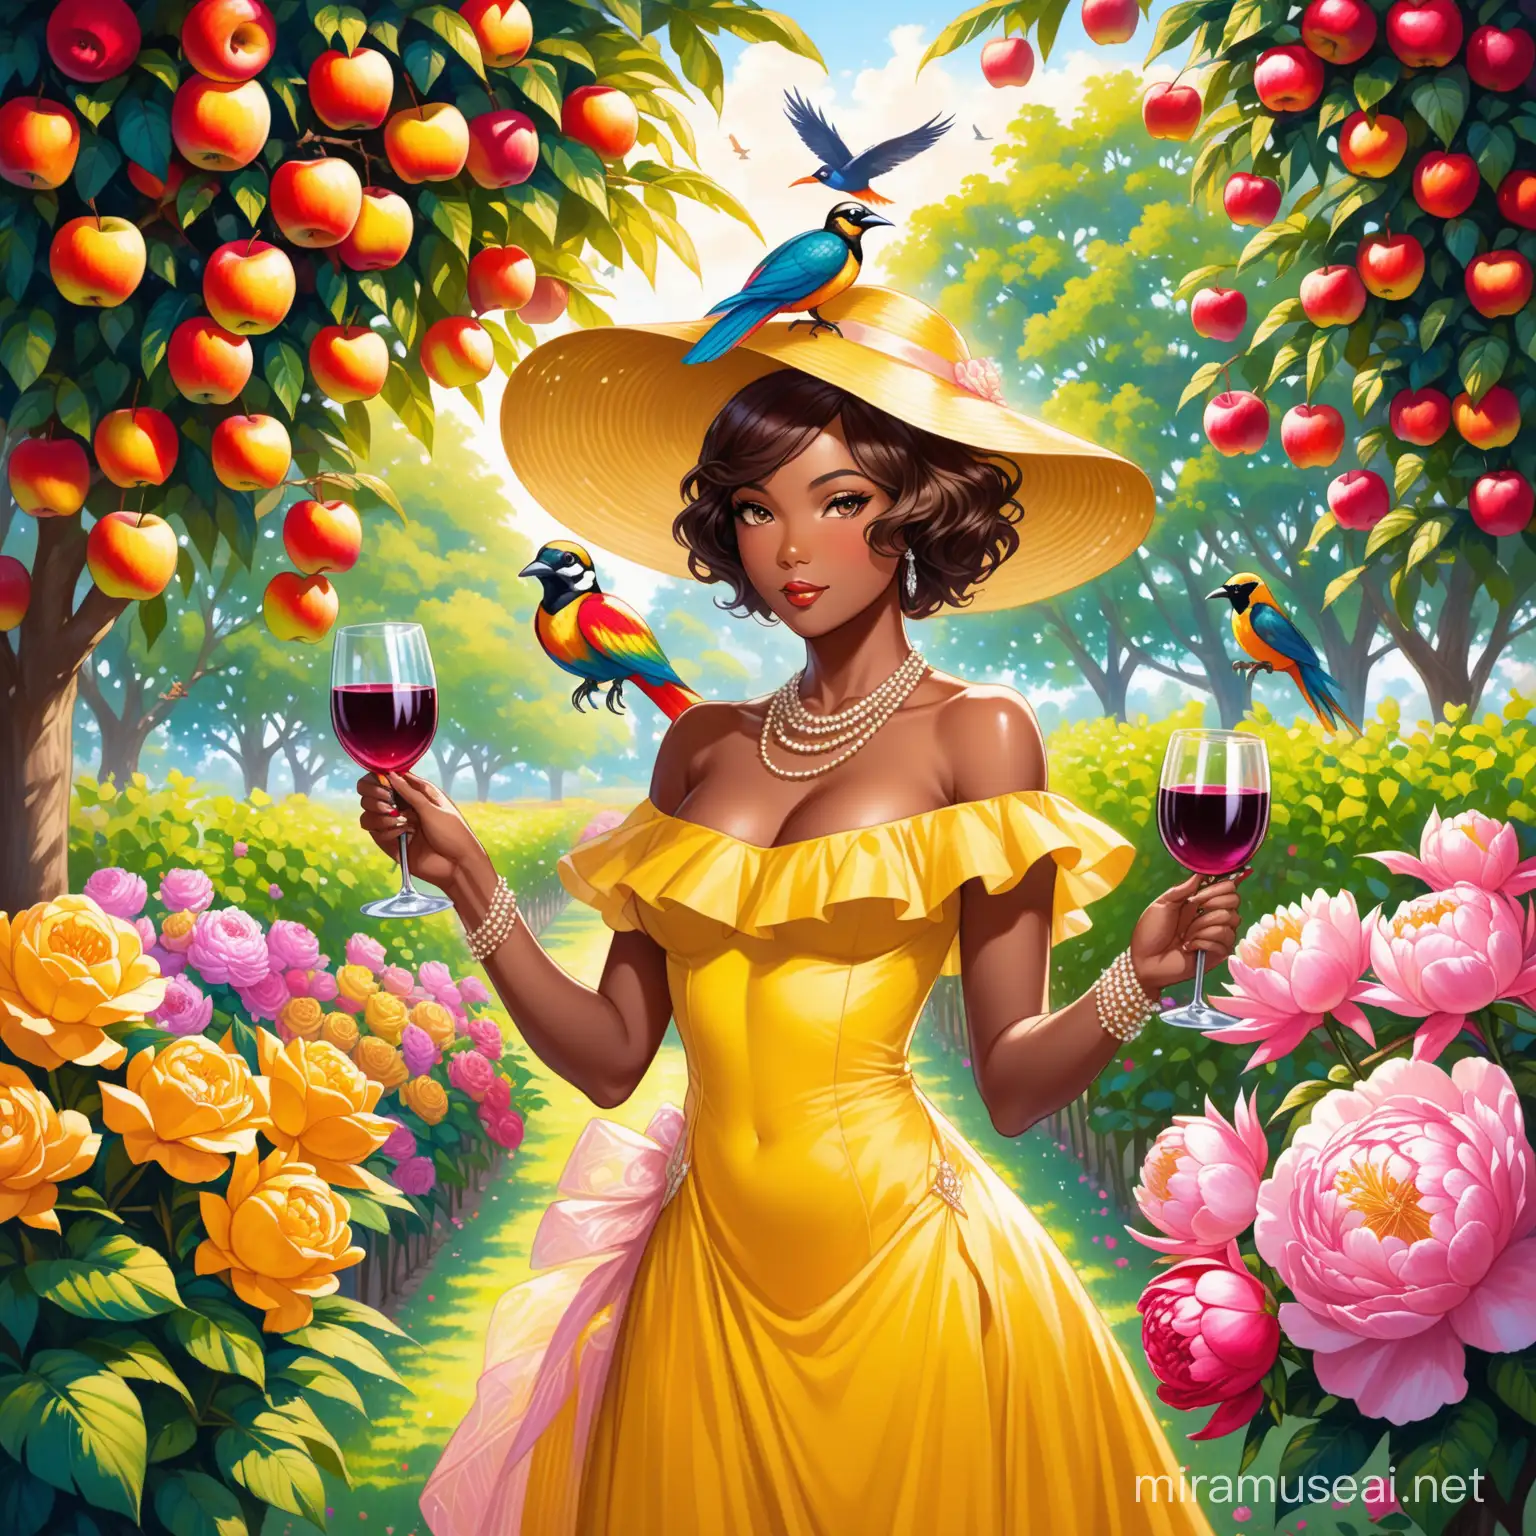 AFRICAN AMERICAN DARK SKIN LADY WEARING A YELLOW GREAT GATSBY DRESS painting A PORTAIT OF BLACK PEOPLE out in the garden filled with APPLE TREES, roses and peonies and bird of paradise and all types of beautiful wine and cheese